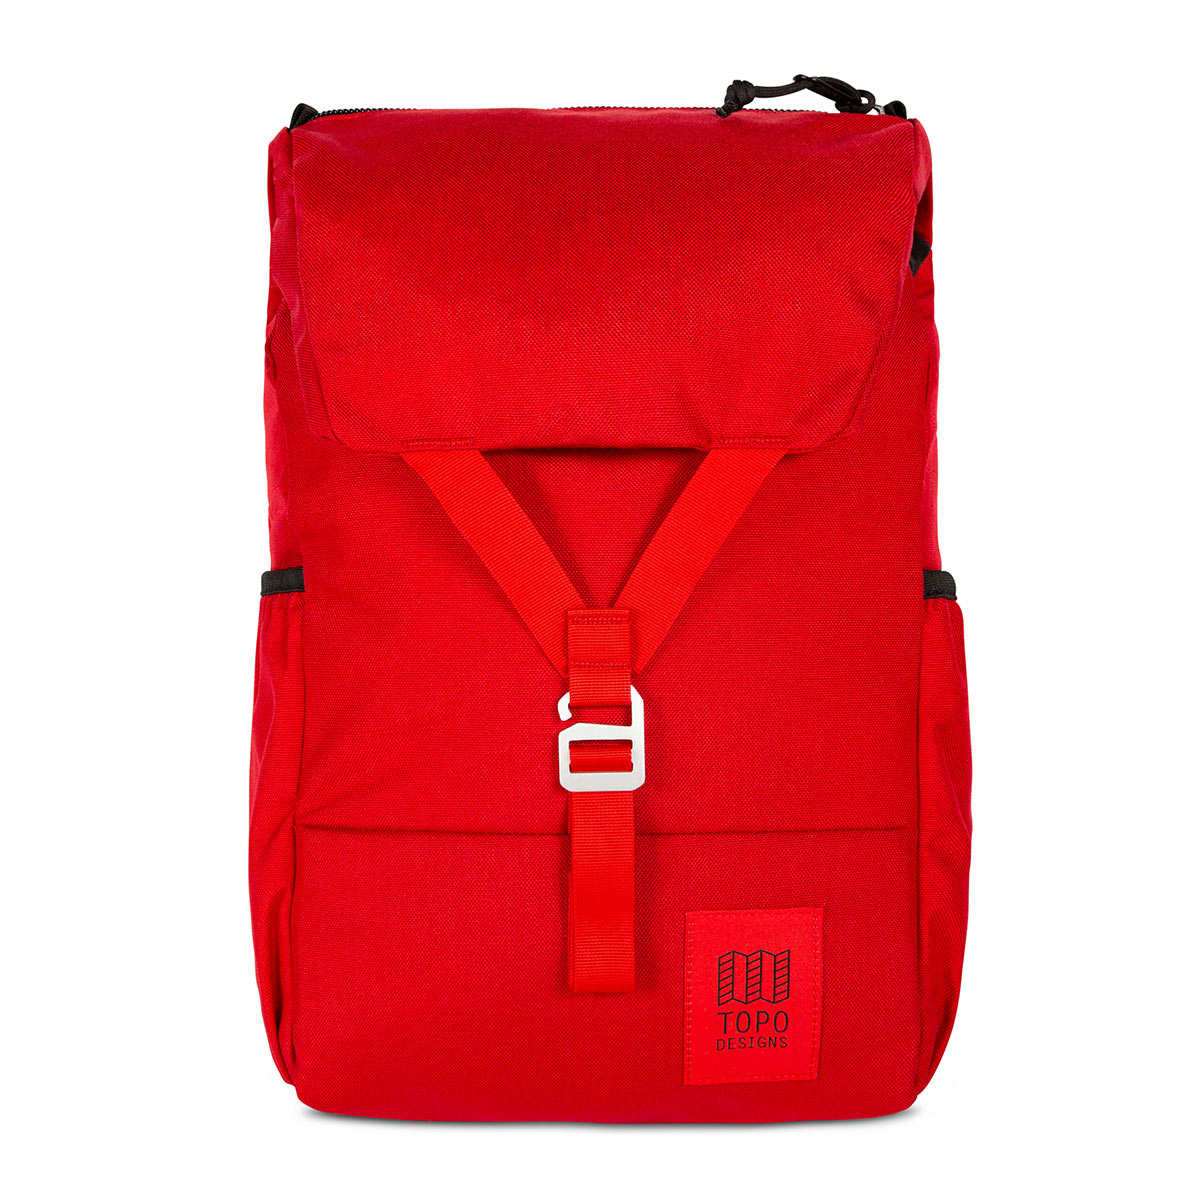 Topo Designs Y-Pack Red, incredibly robust and lightweight backpack